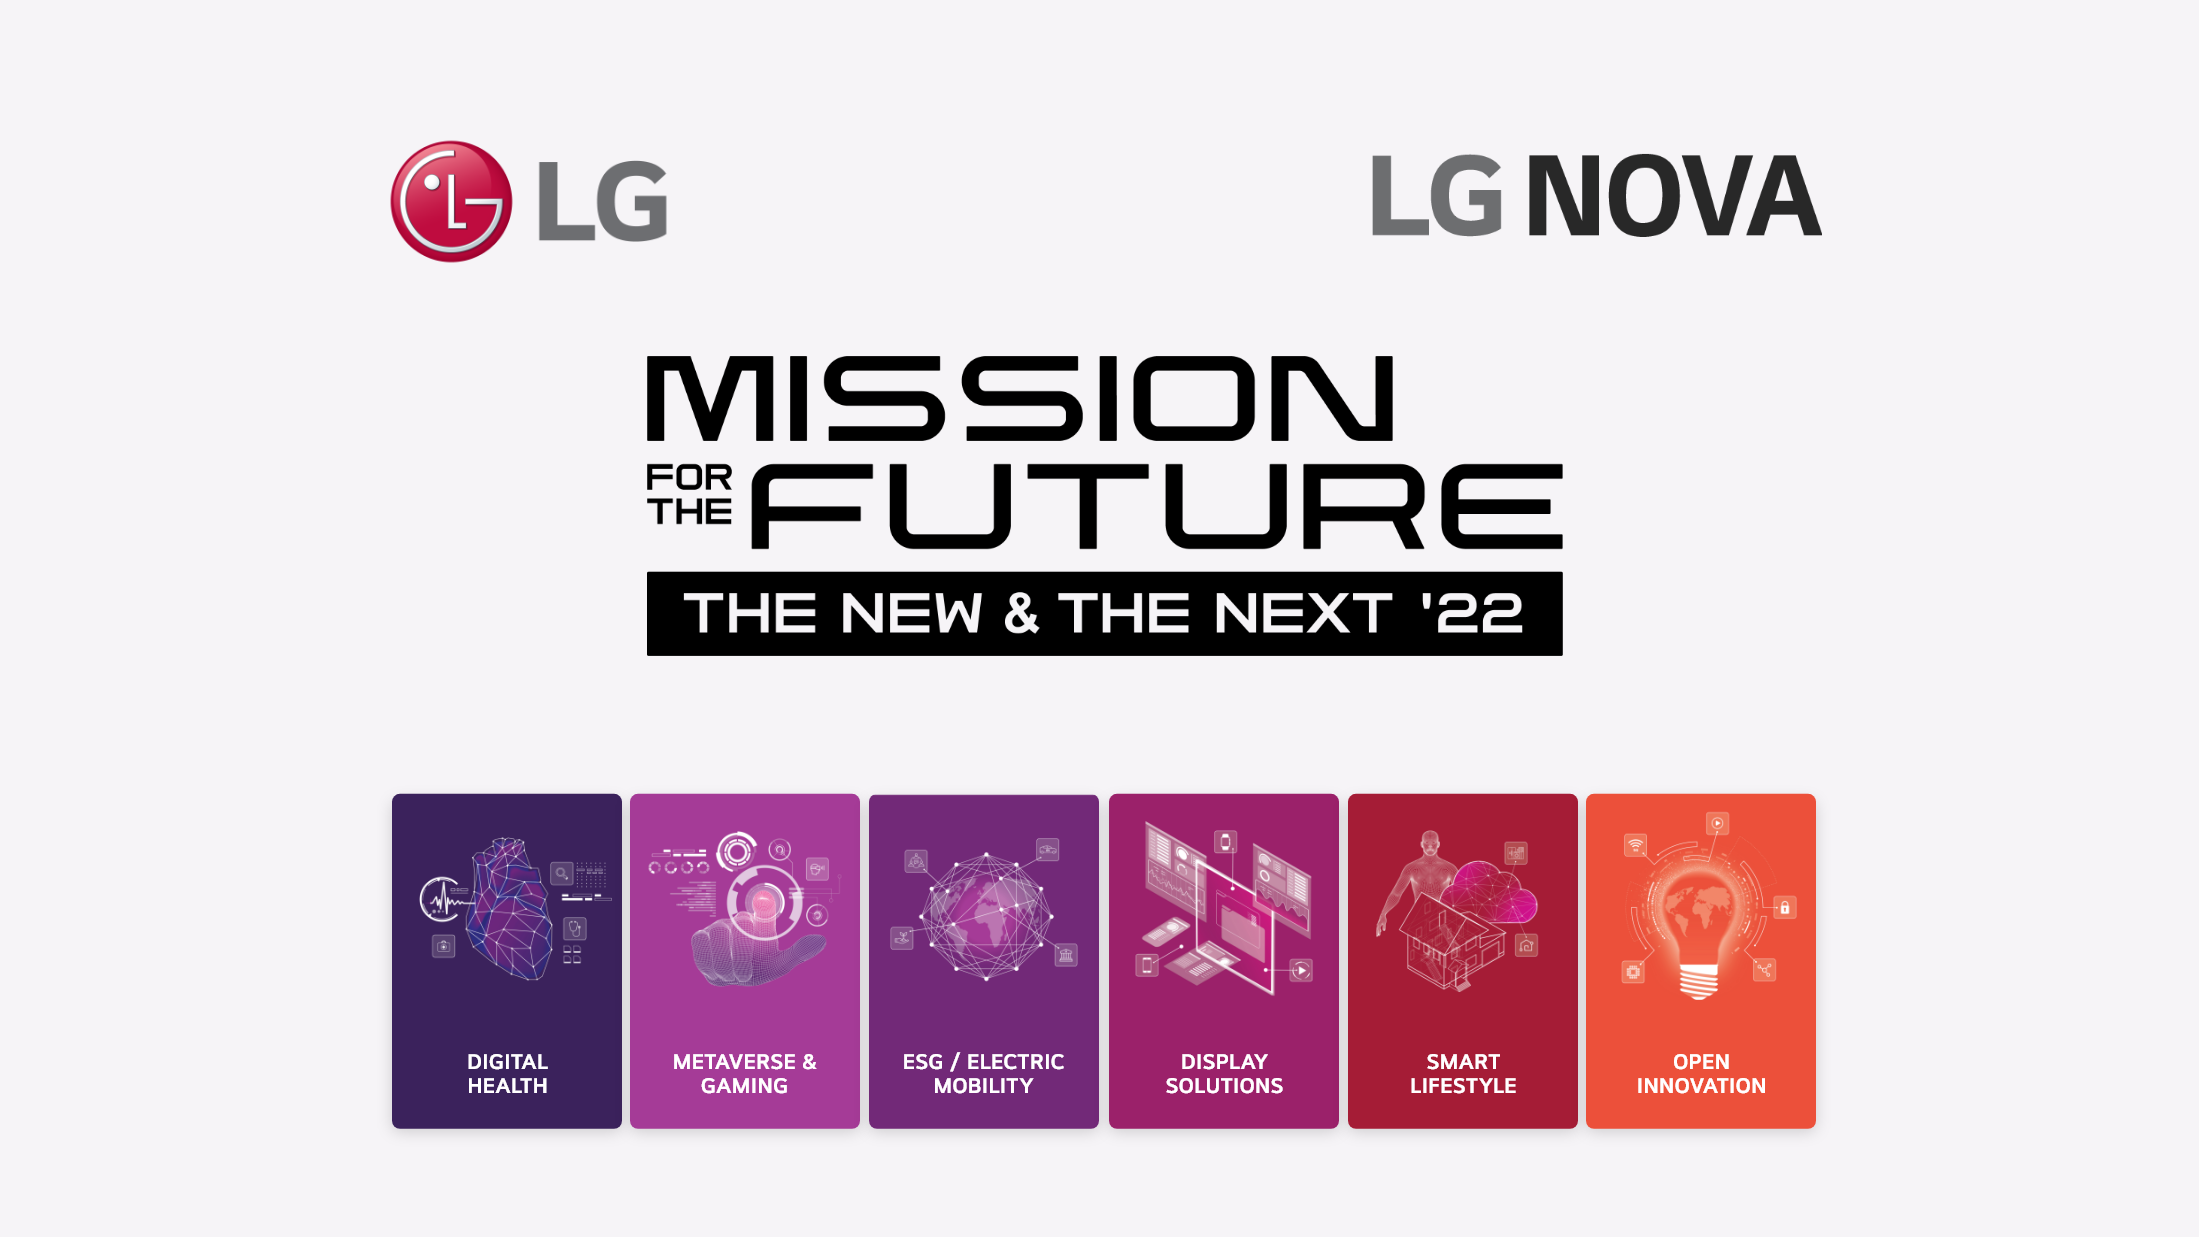 CALLING ALL INNOVATORS: LG SEEKS NEW COLLABORATORS TO CHANGE THE WORLD ONE IDEA AT A TIME